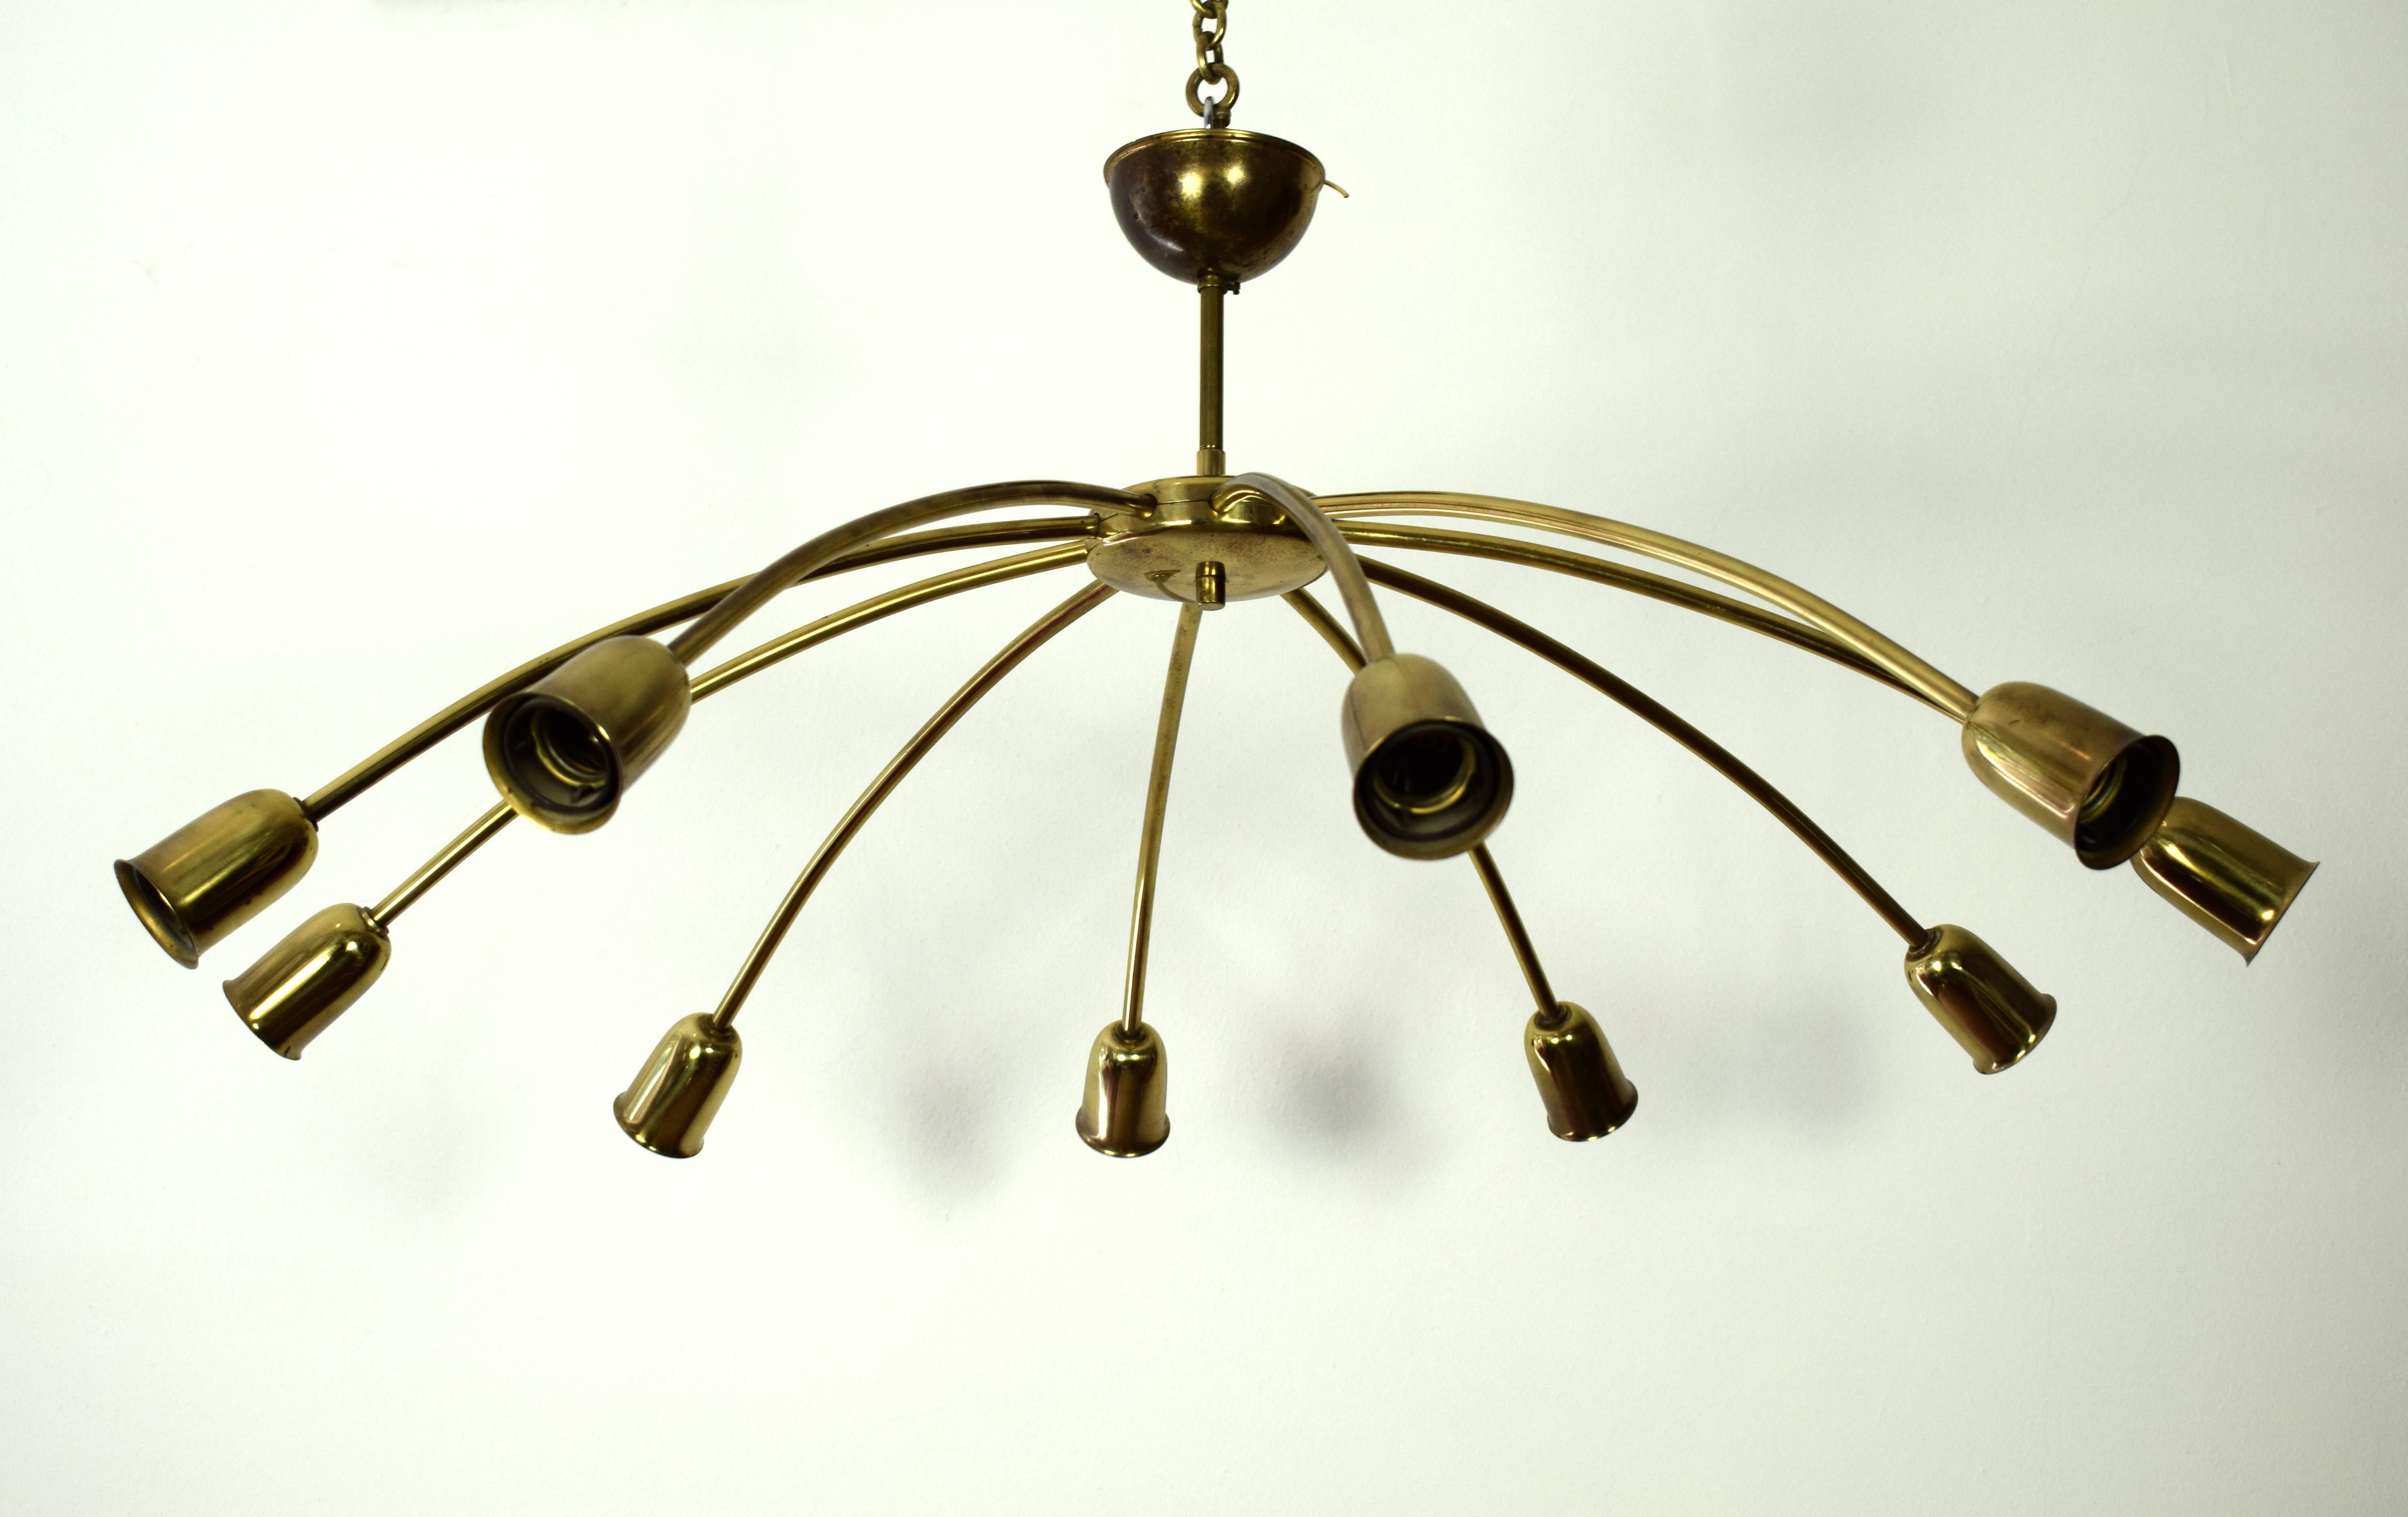 Ten curved brass arms with ten sockets features this huge spider ceiling lamp, designed and executed by J. T. Kalmar, Vienna, 1950s.

Lit.: Kalmar Katalog, 60, Model Nr. 5125, W DL 4.